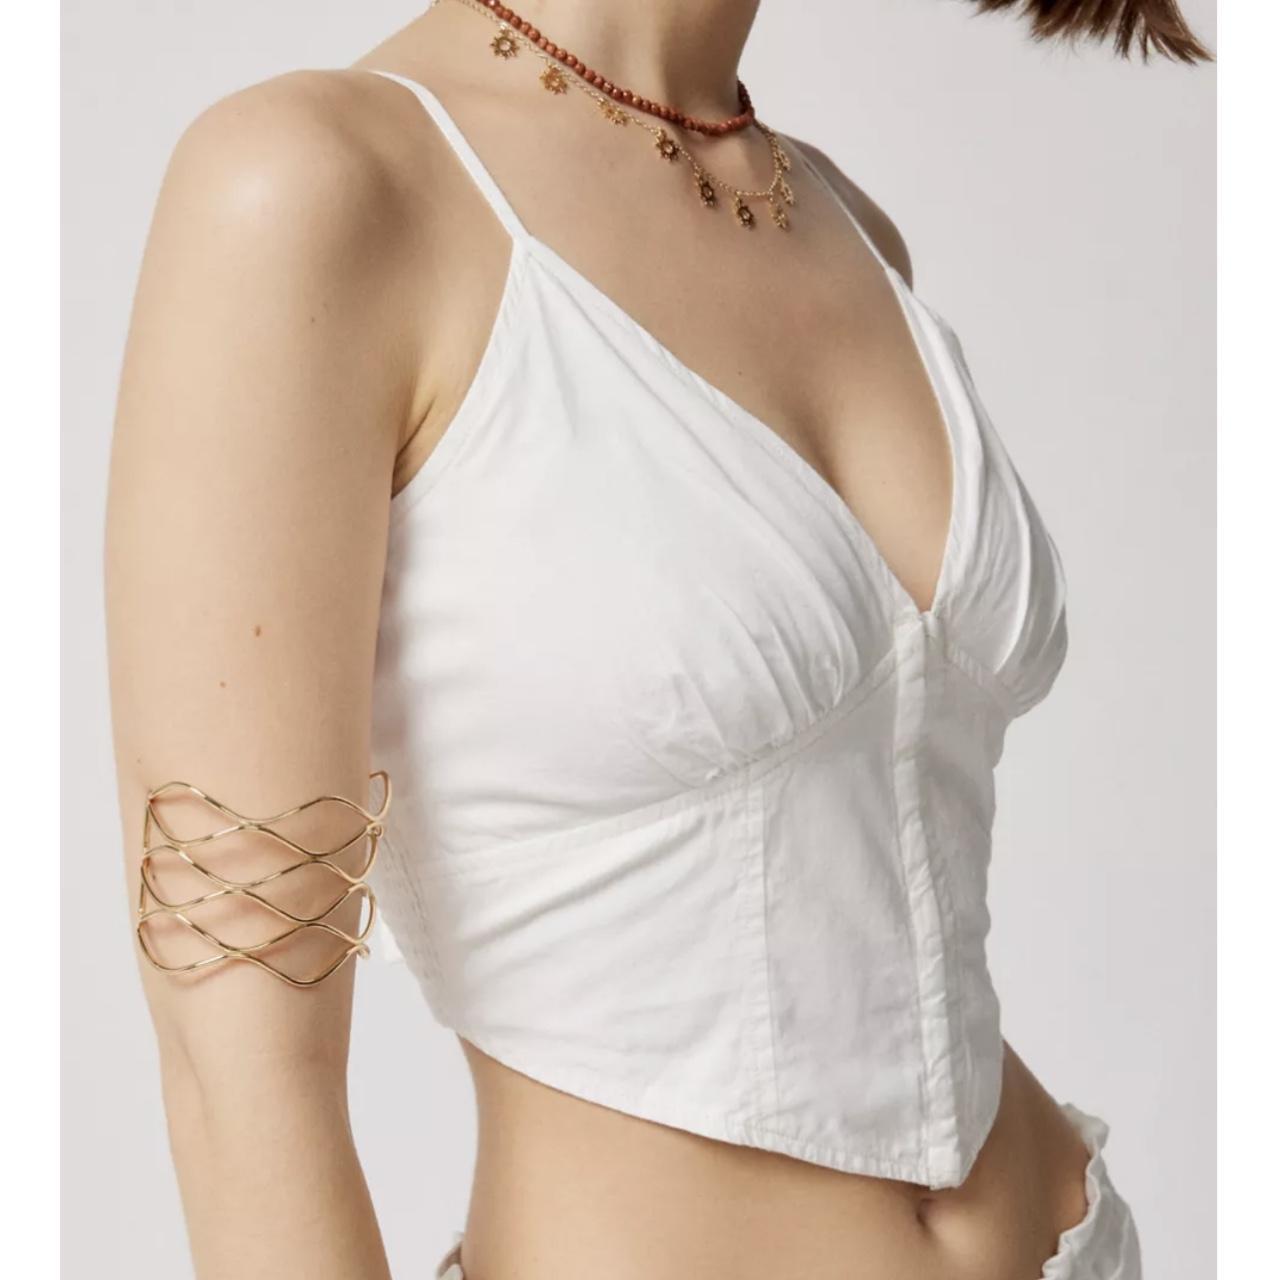 Urban Outfitters Kendall Poplin Bustier Top. Never